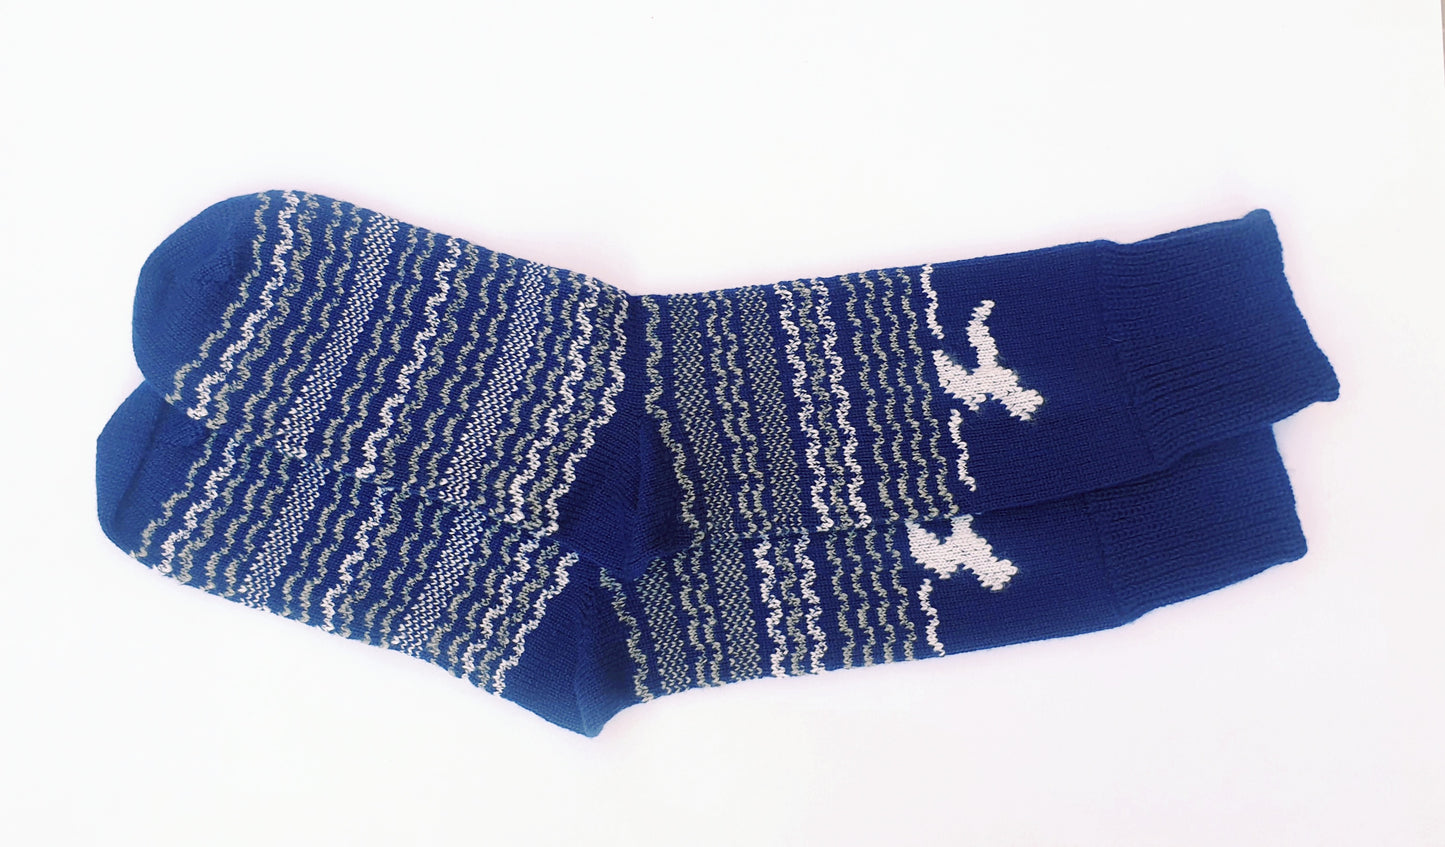 Limited Edition Cashmere Socks